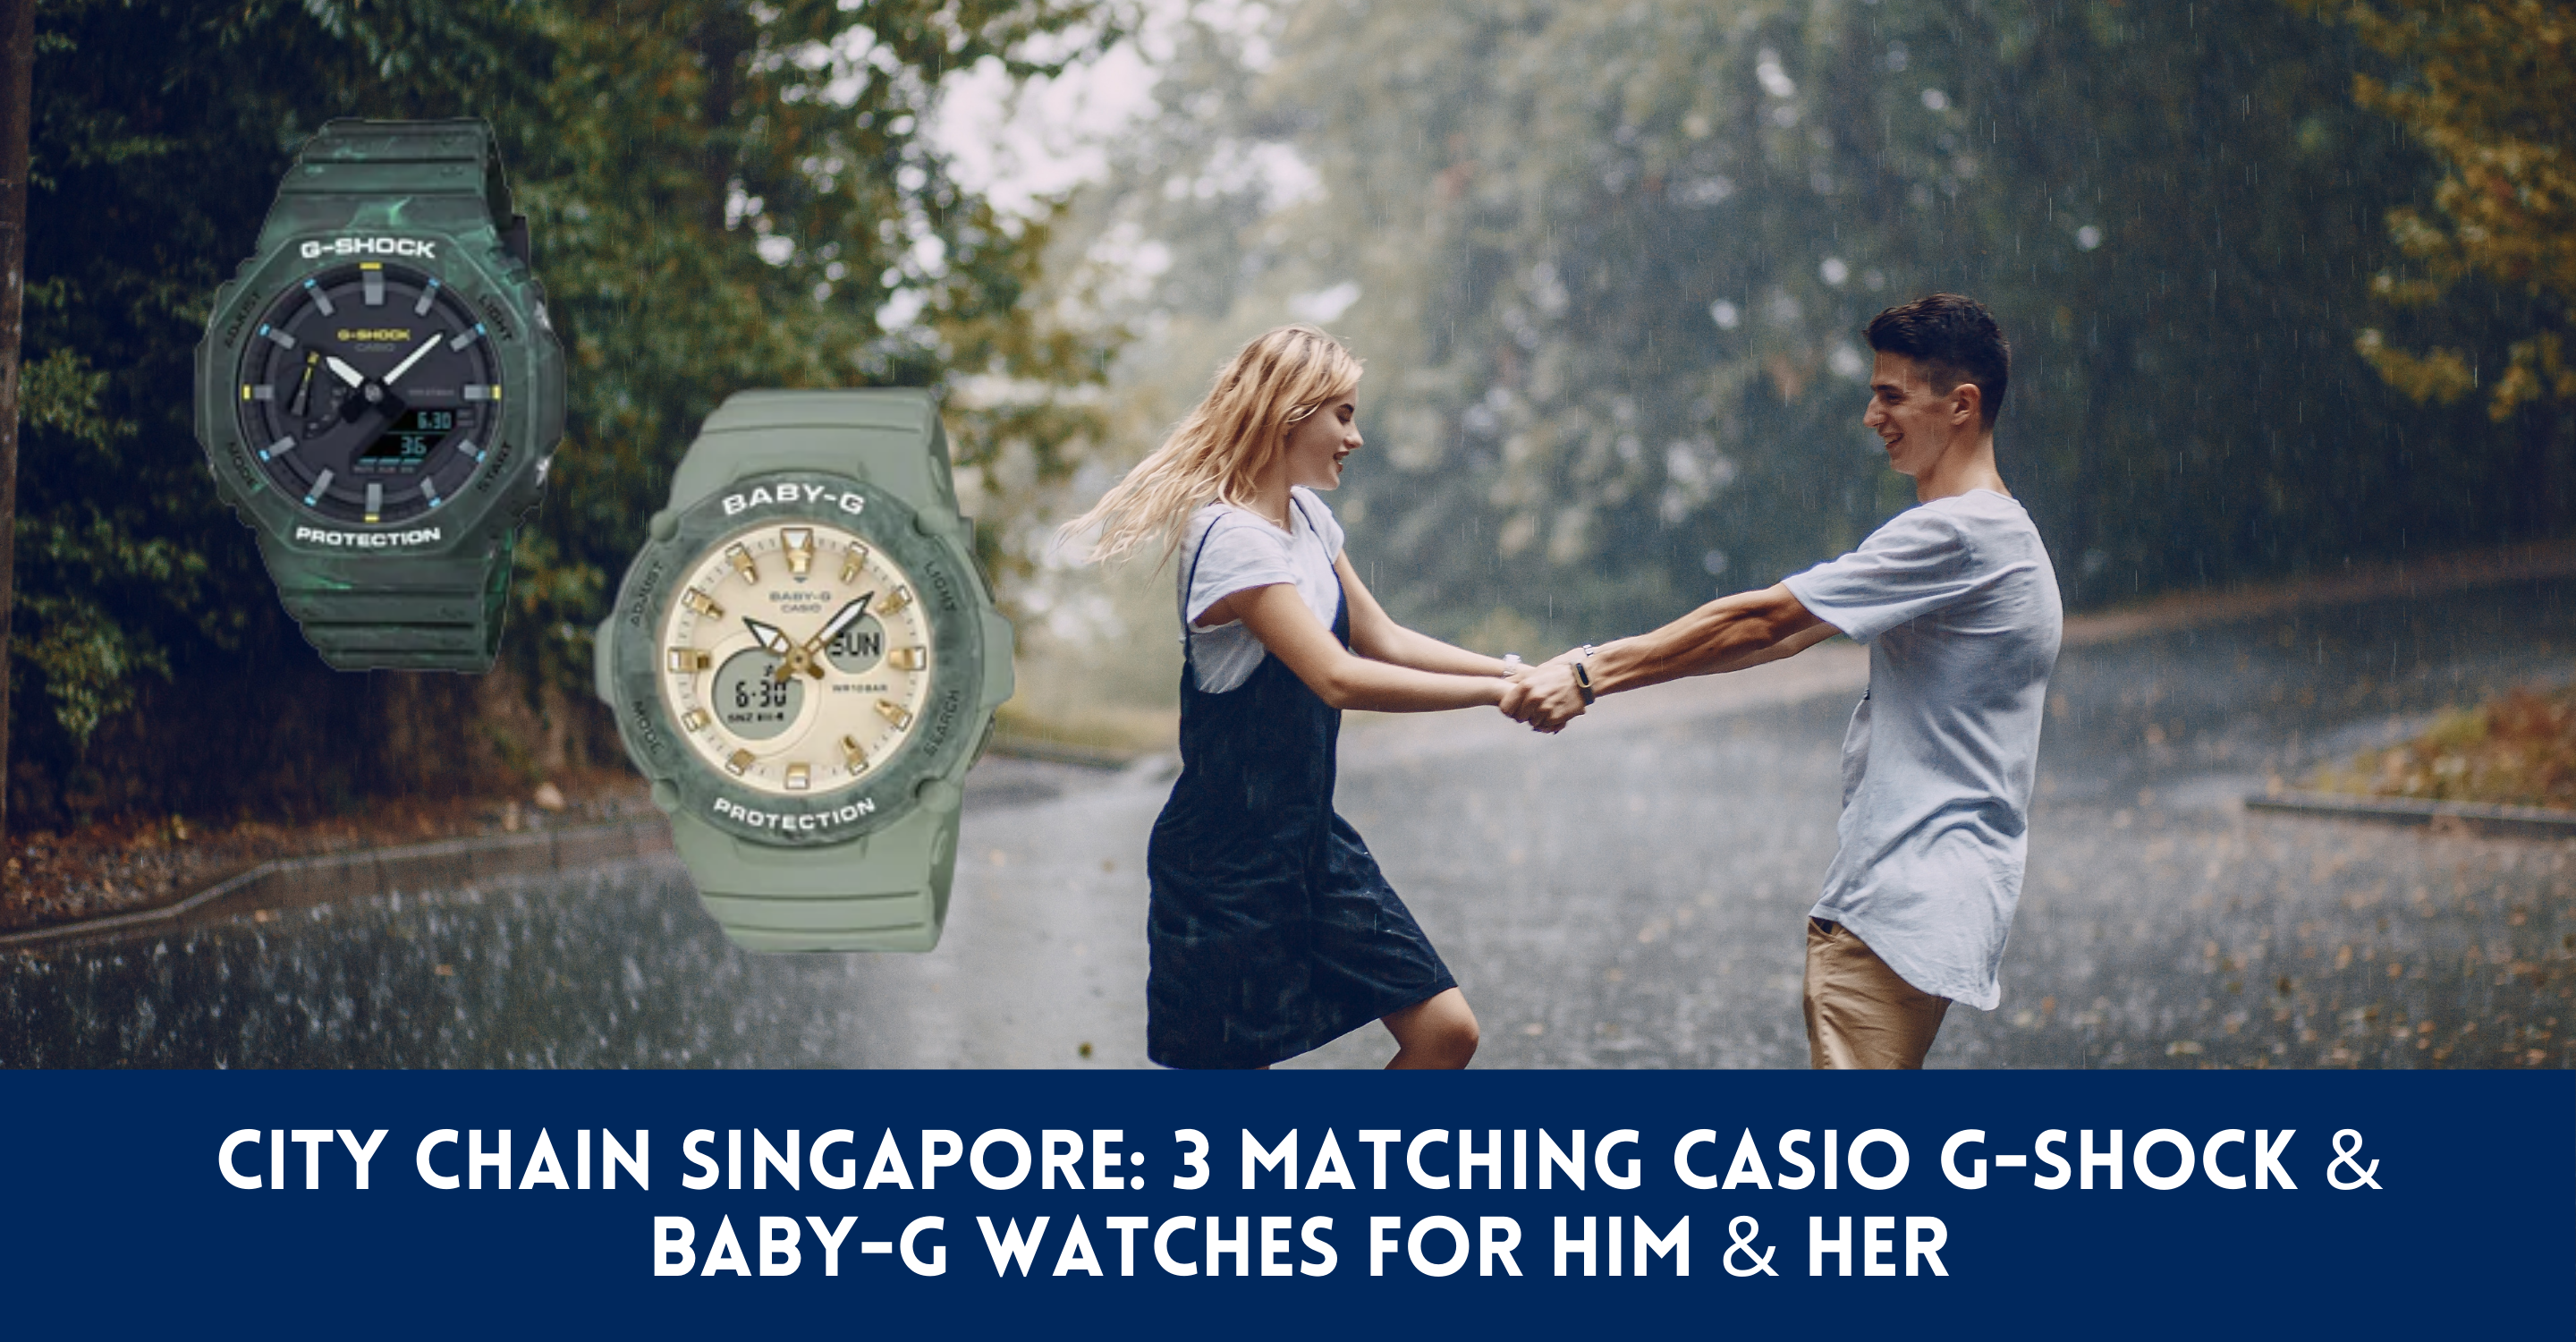 Him CASIO – G-Shock Chain 3 City Baby-G & & For Watches Matching Her Singapore